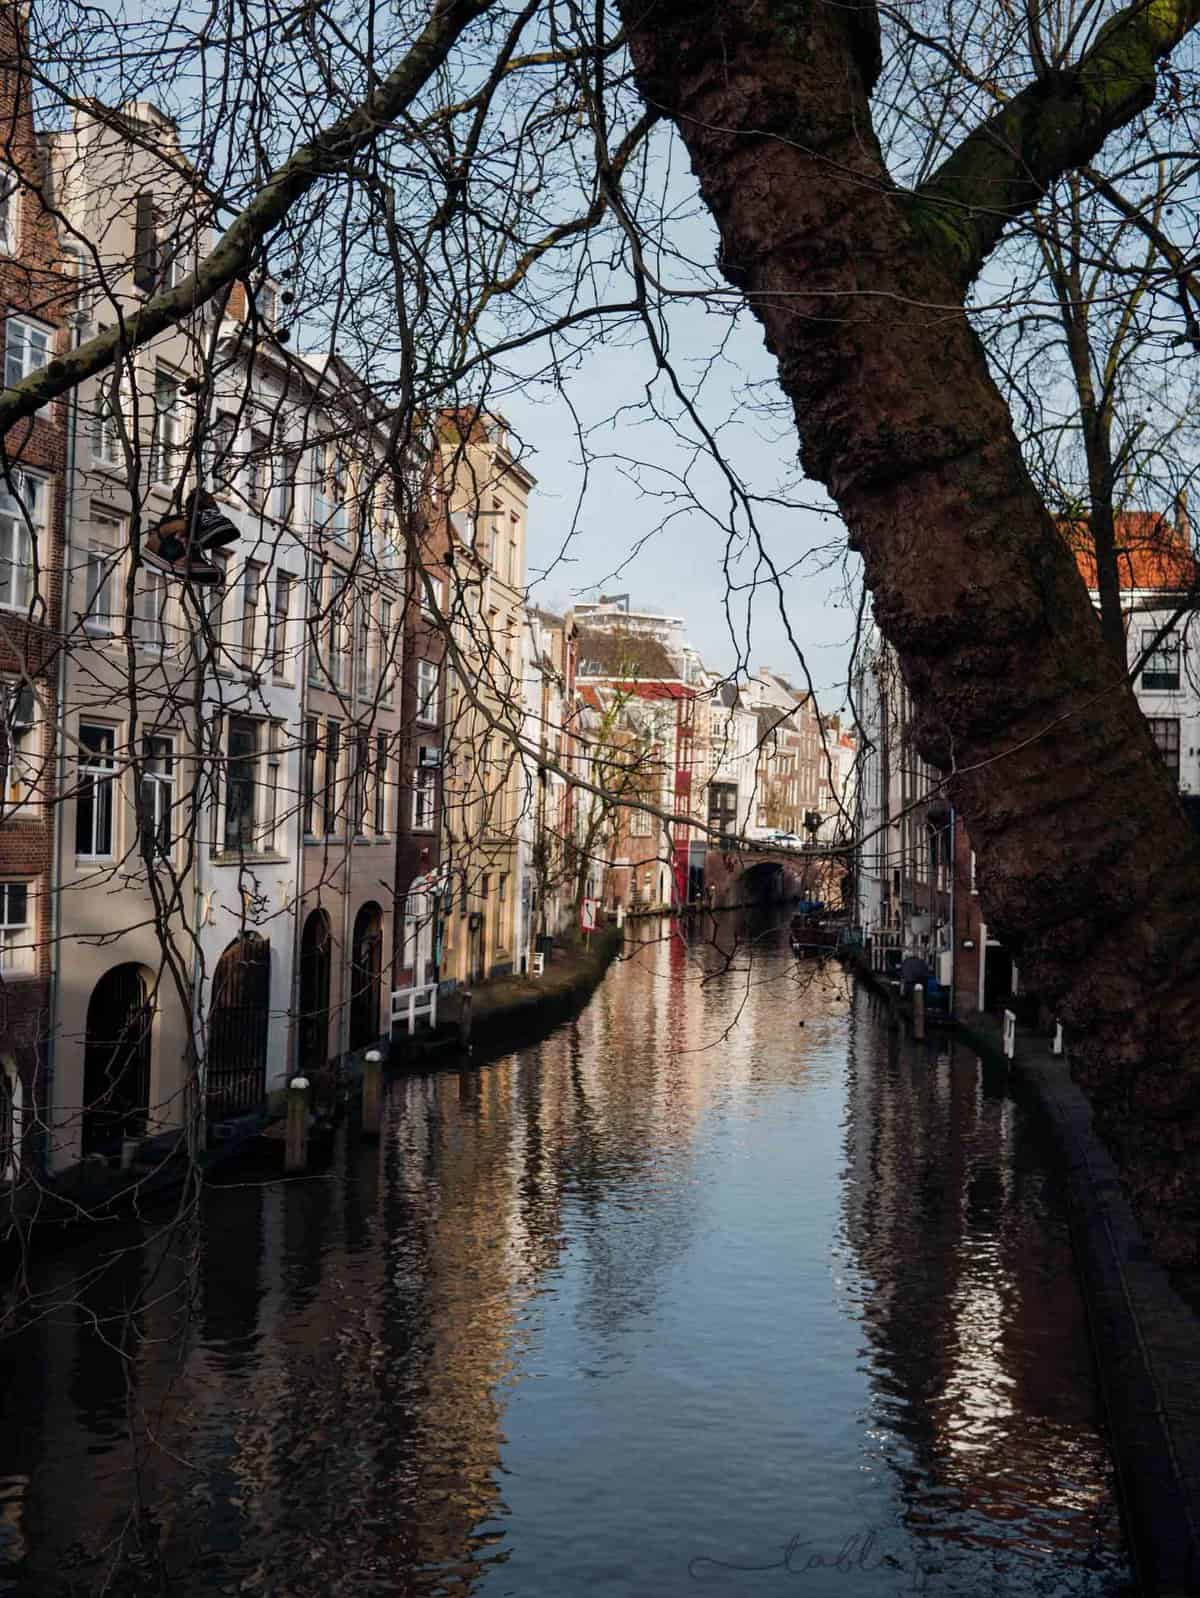 Utrecht, Netherlands is a quaint little scenic city 15 minutes, by train, outside of Amsterdam. It is so scenic and has the cutest cafes. Definitely worth a day trip especially since it's a 15 minute train ride!